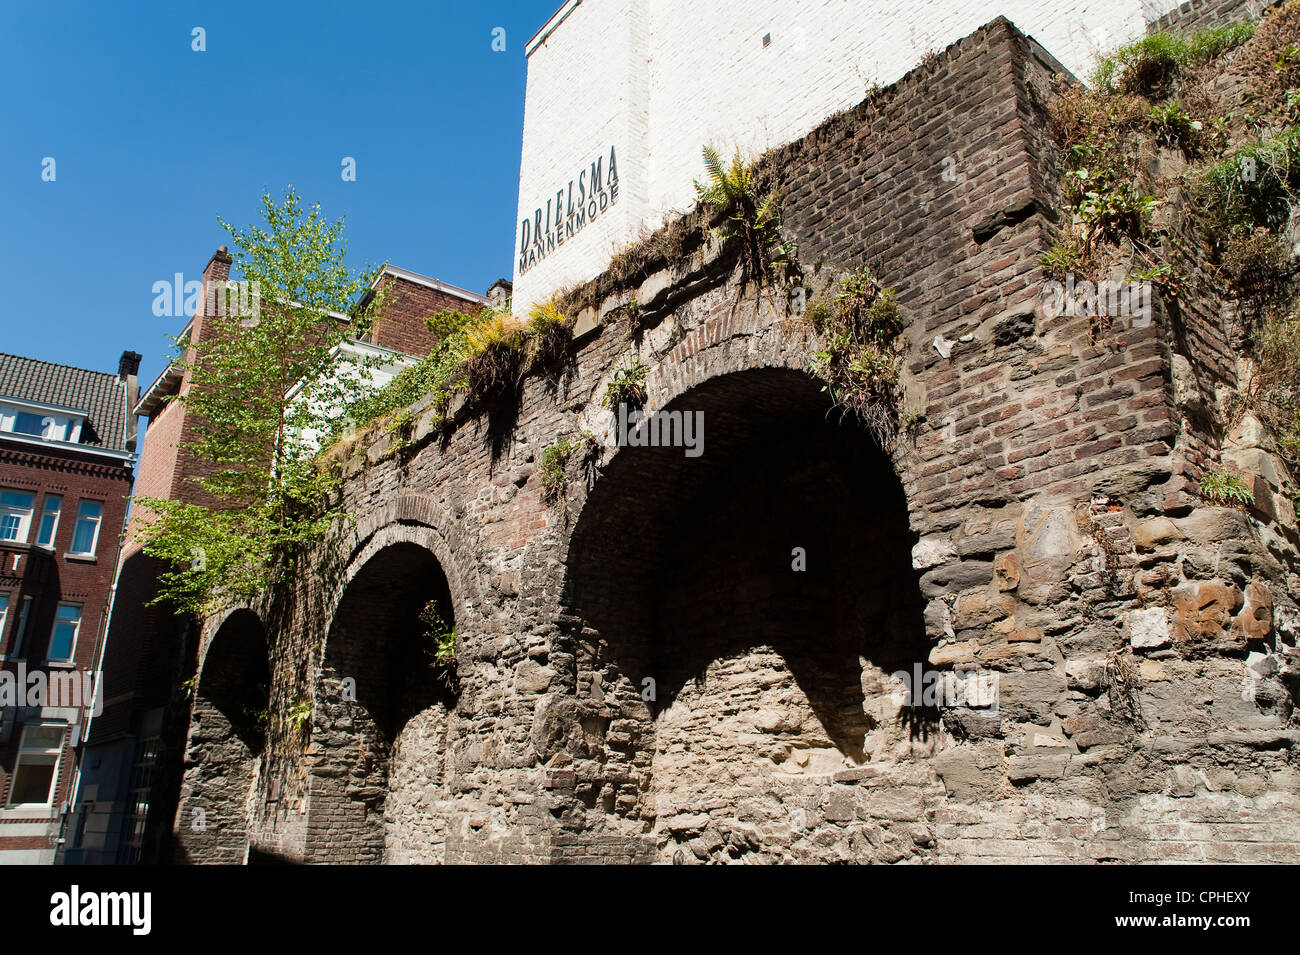 'Eerste Middeleeuwse Omwalling' (First Medieval City Wall), year 1229, Maastricht, Limburg, The Netherlands, Europe. Stock Photo